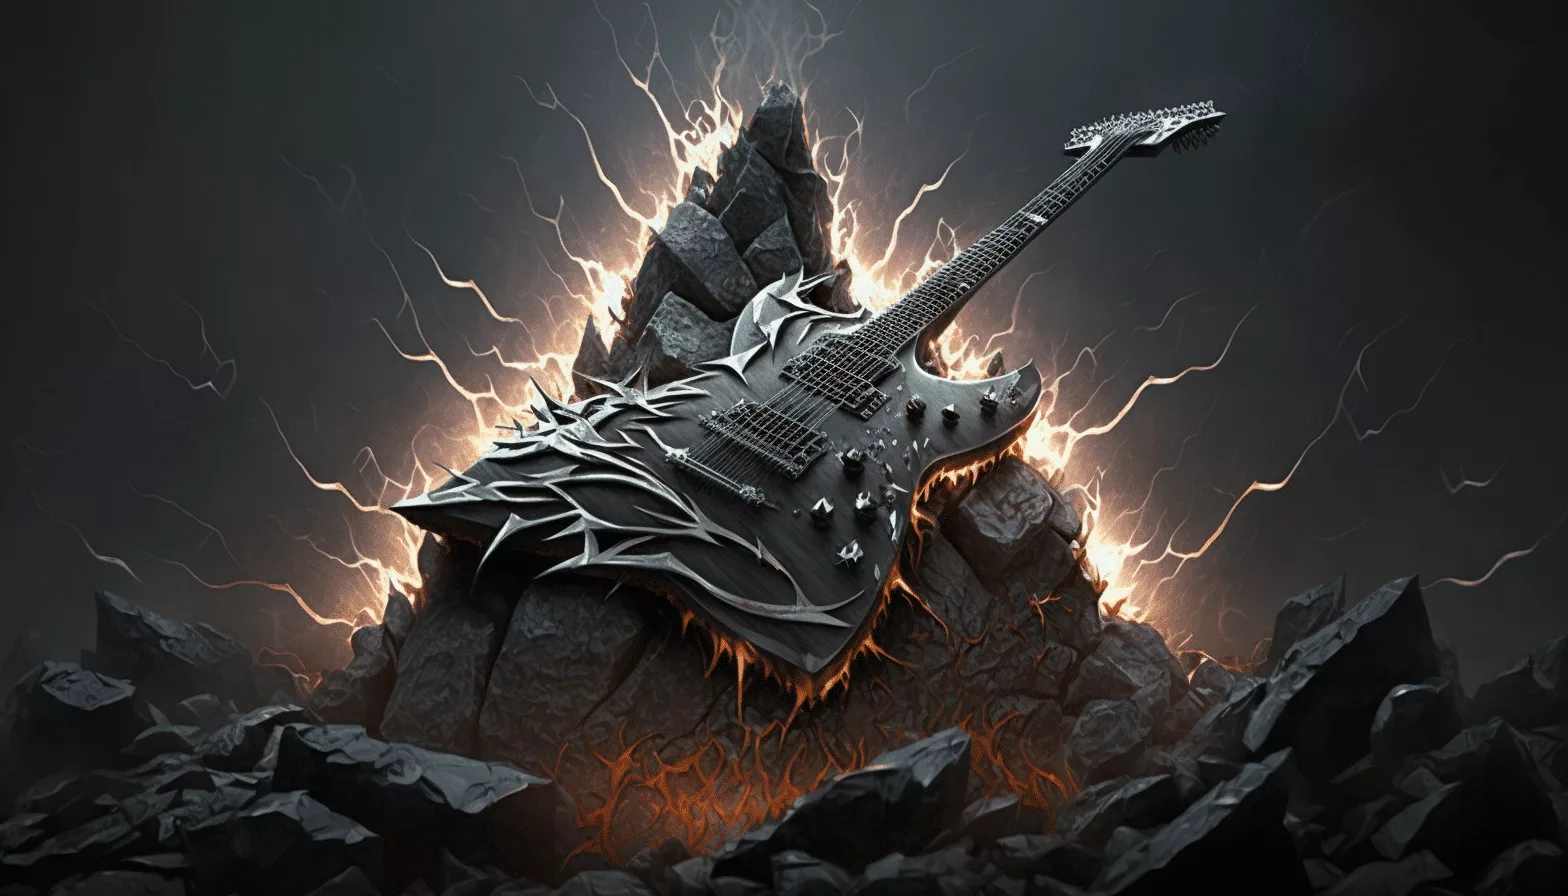 A guitar is sitting on top of a rock in the middle of a fire.